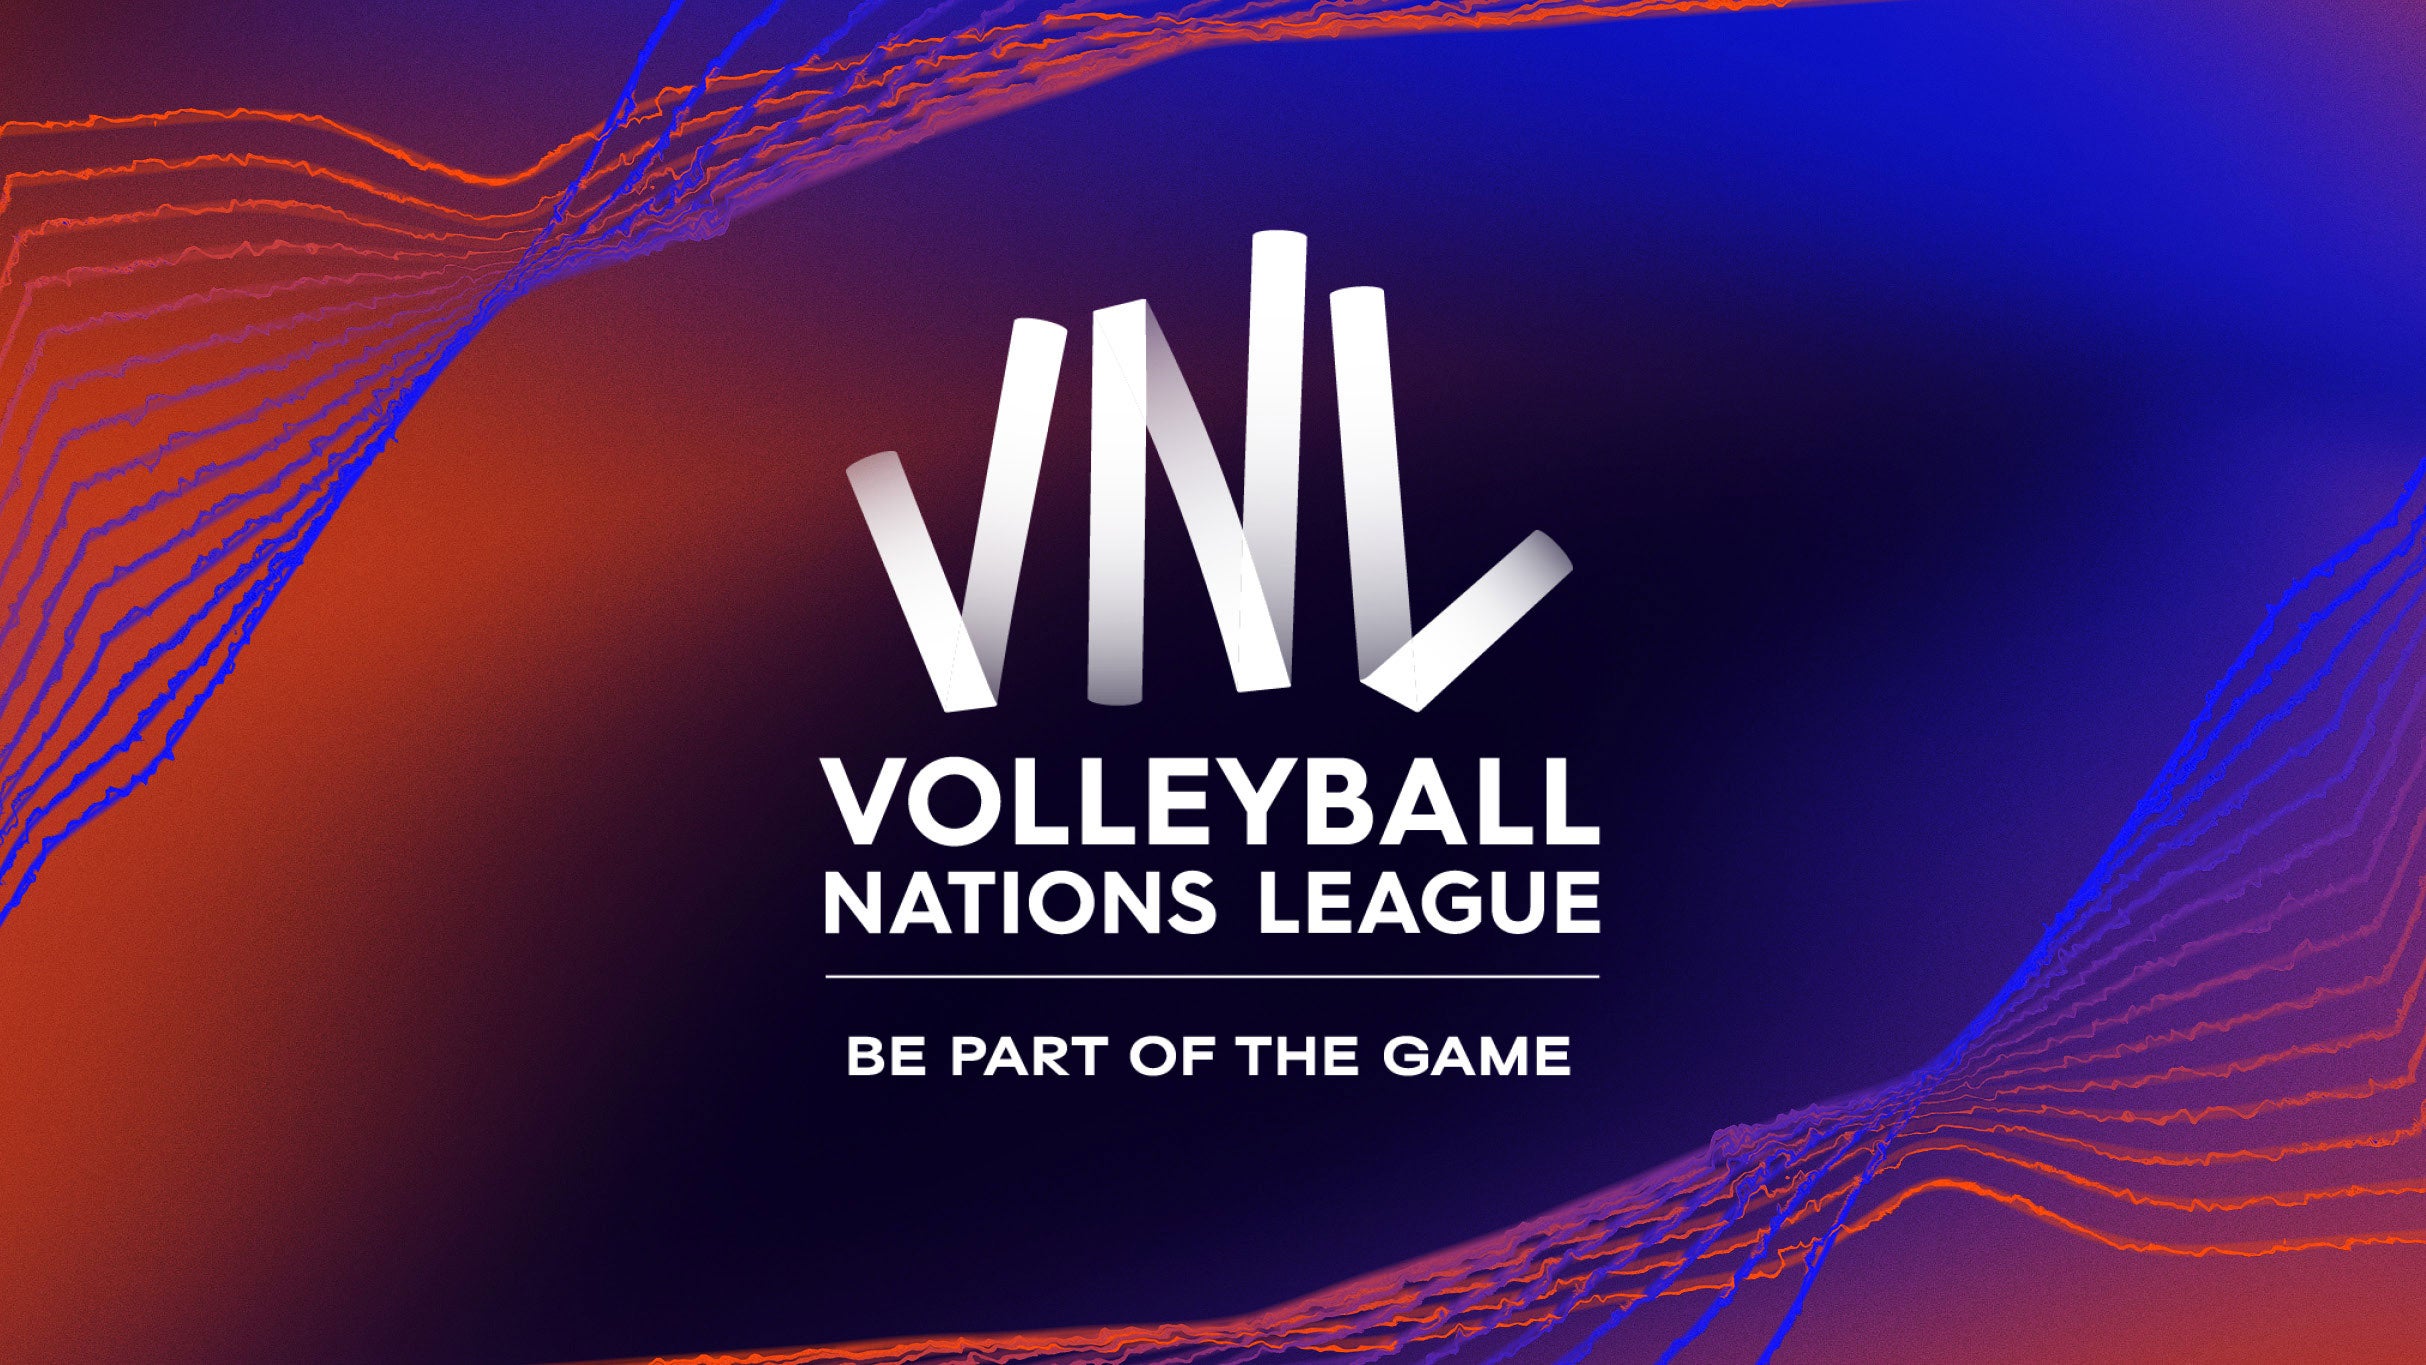 Volleyball Nations League - Match Day 2 presales in Ottawa